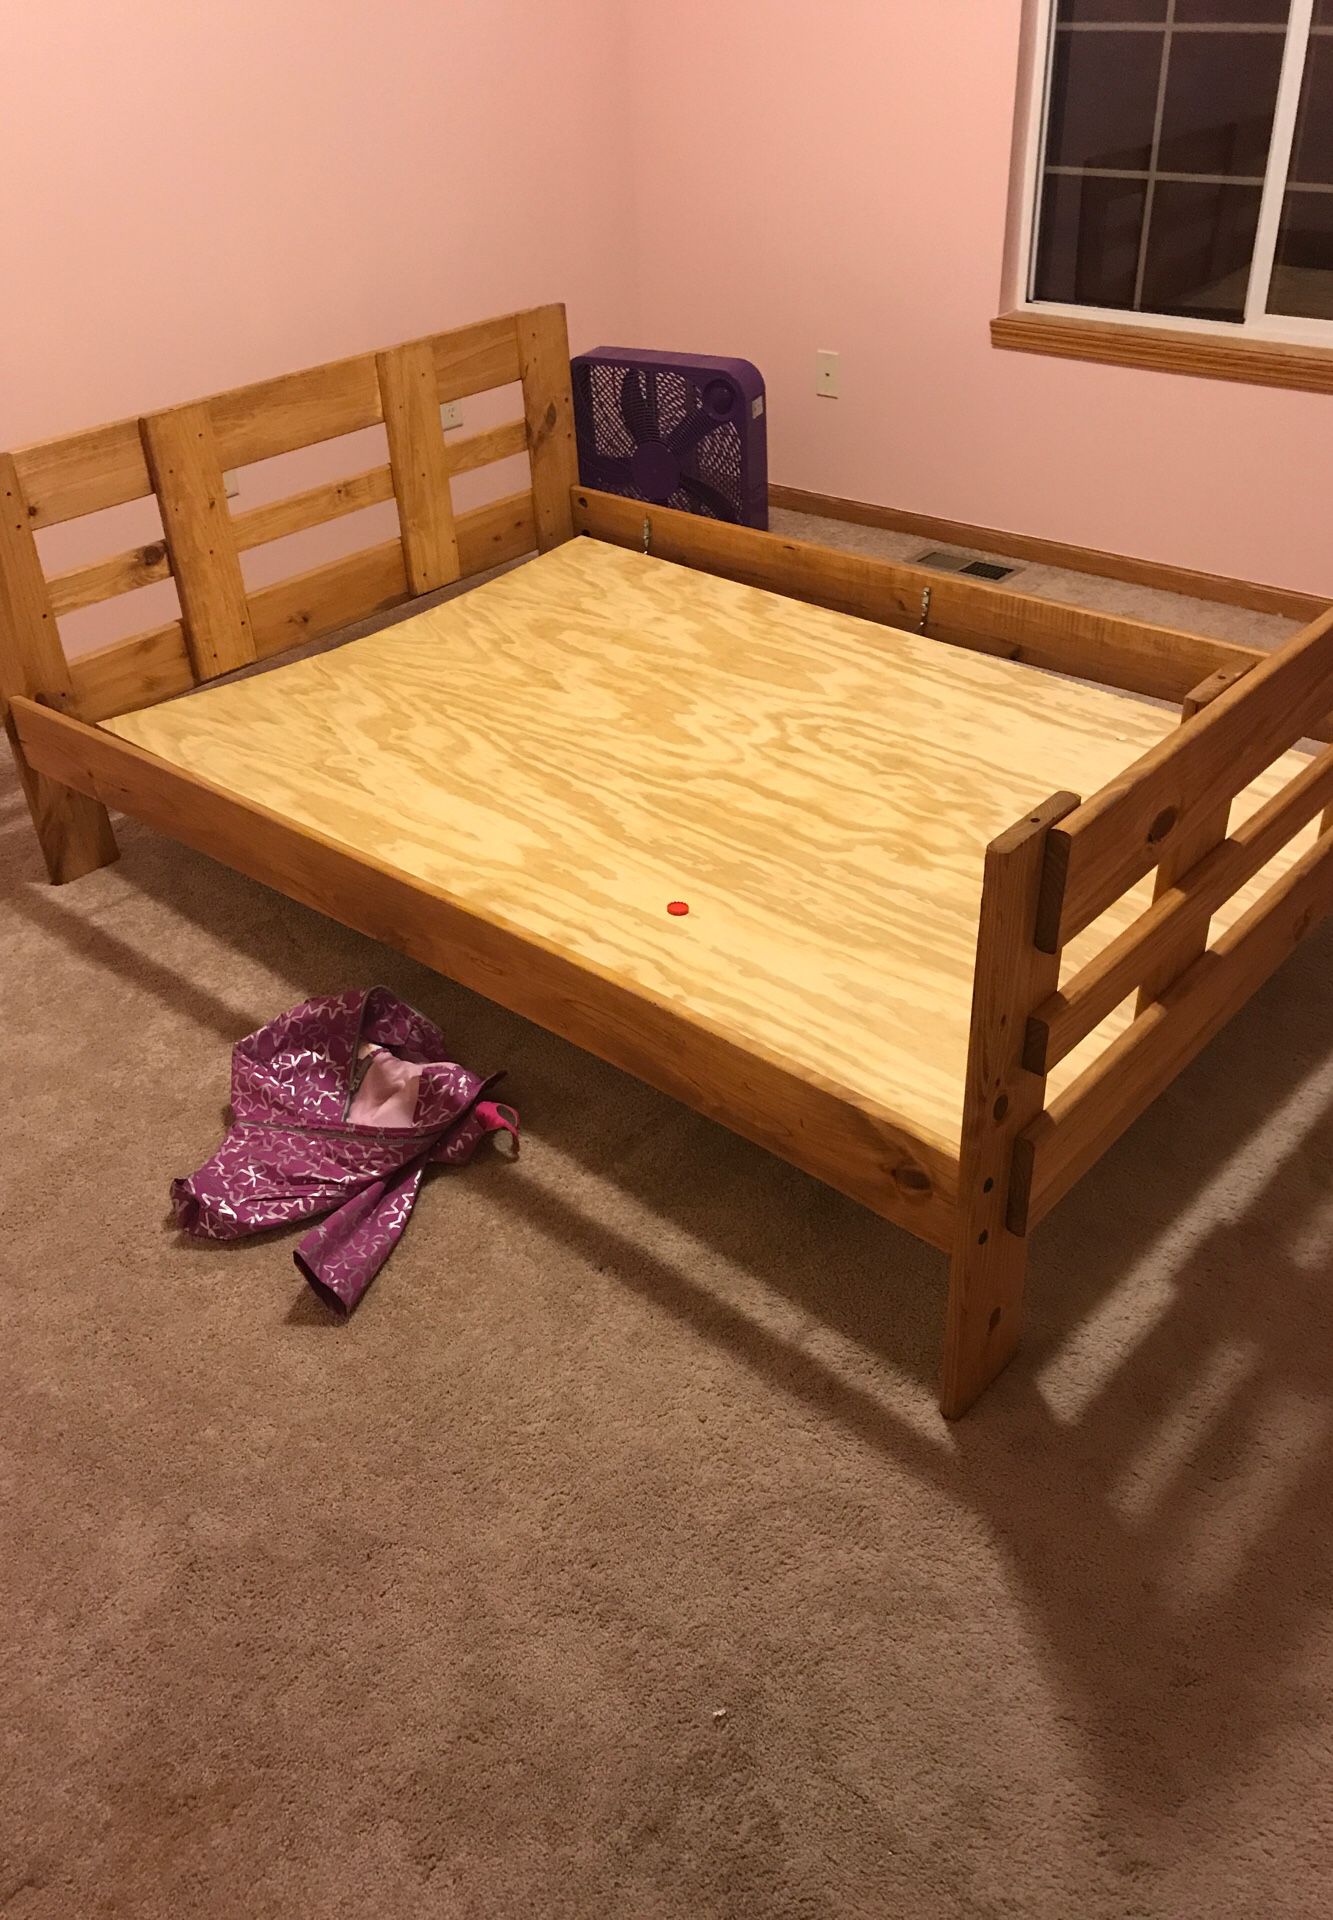 Full size Bunk bed for sale no mattress